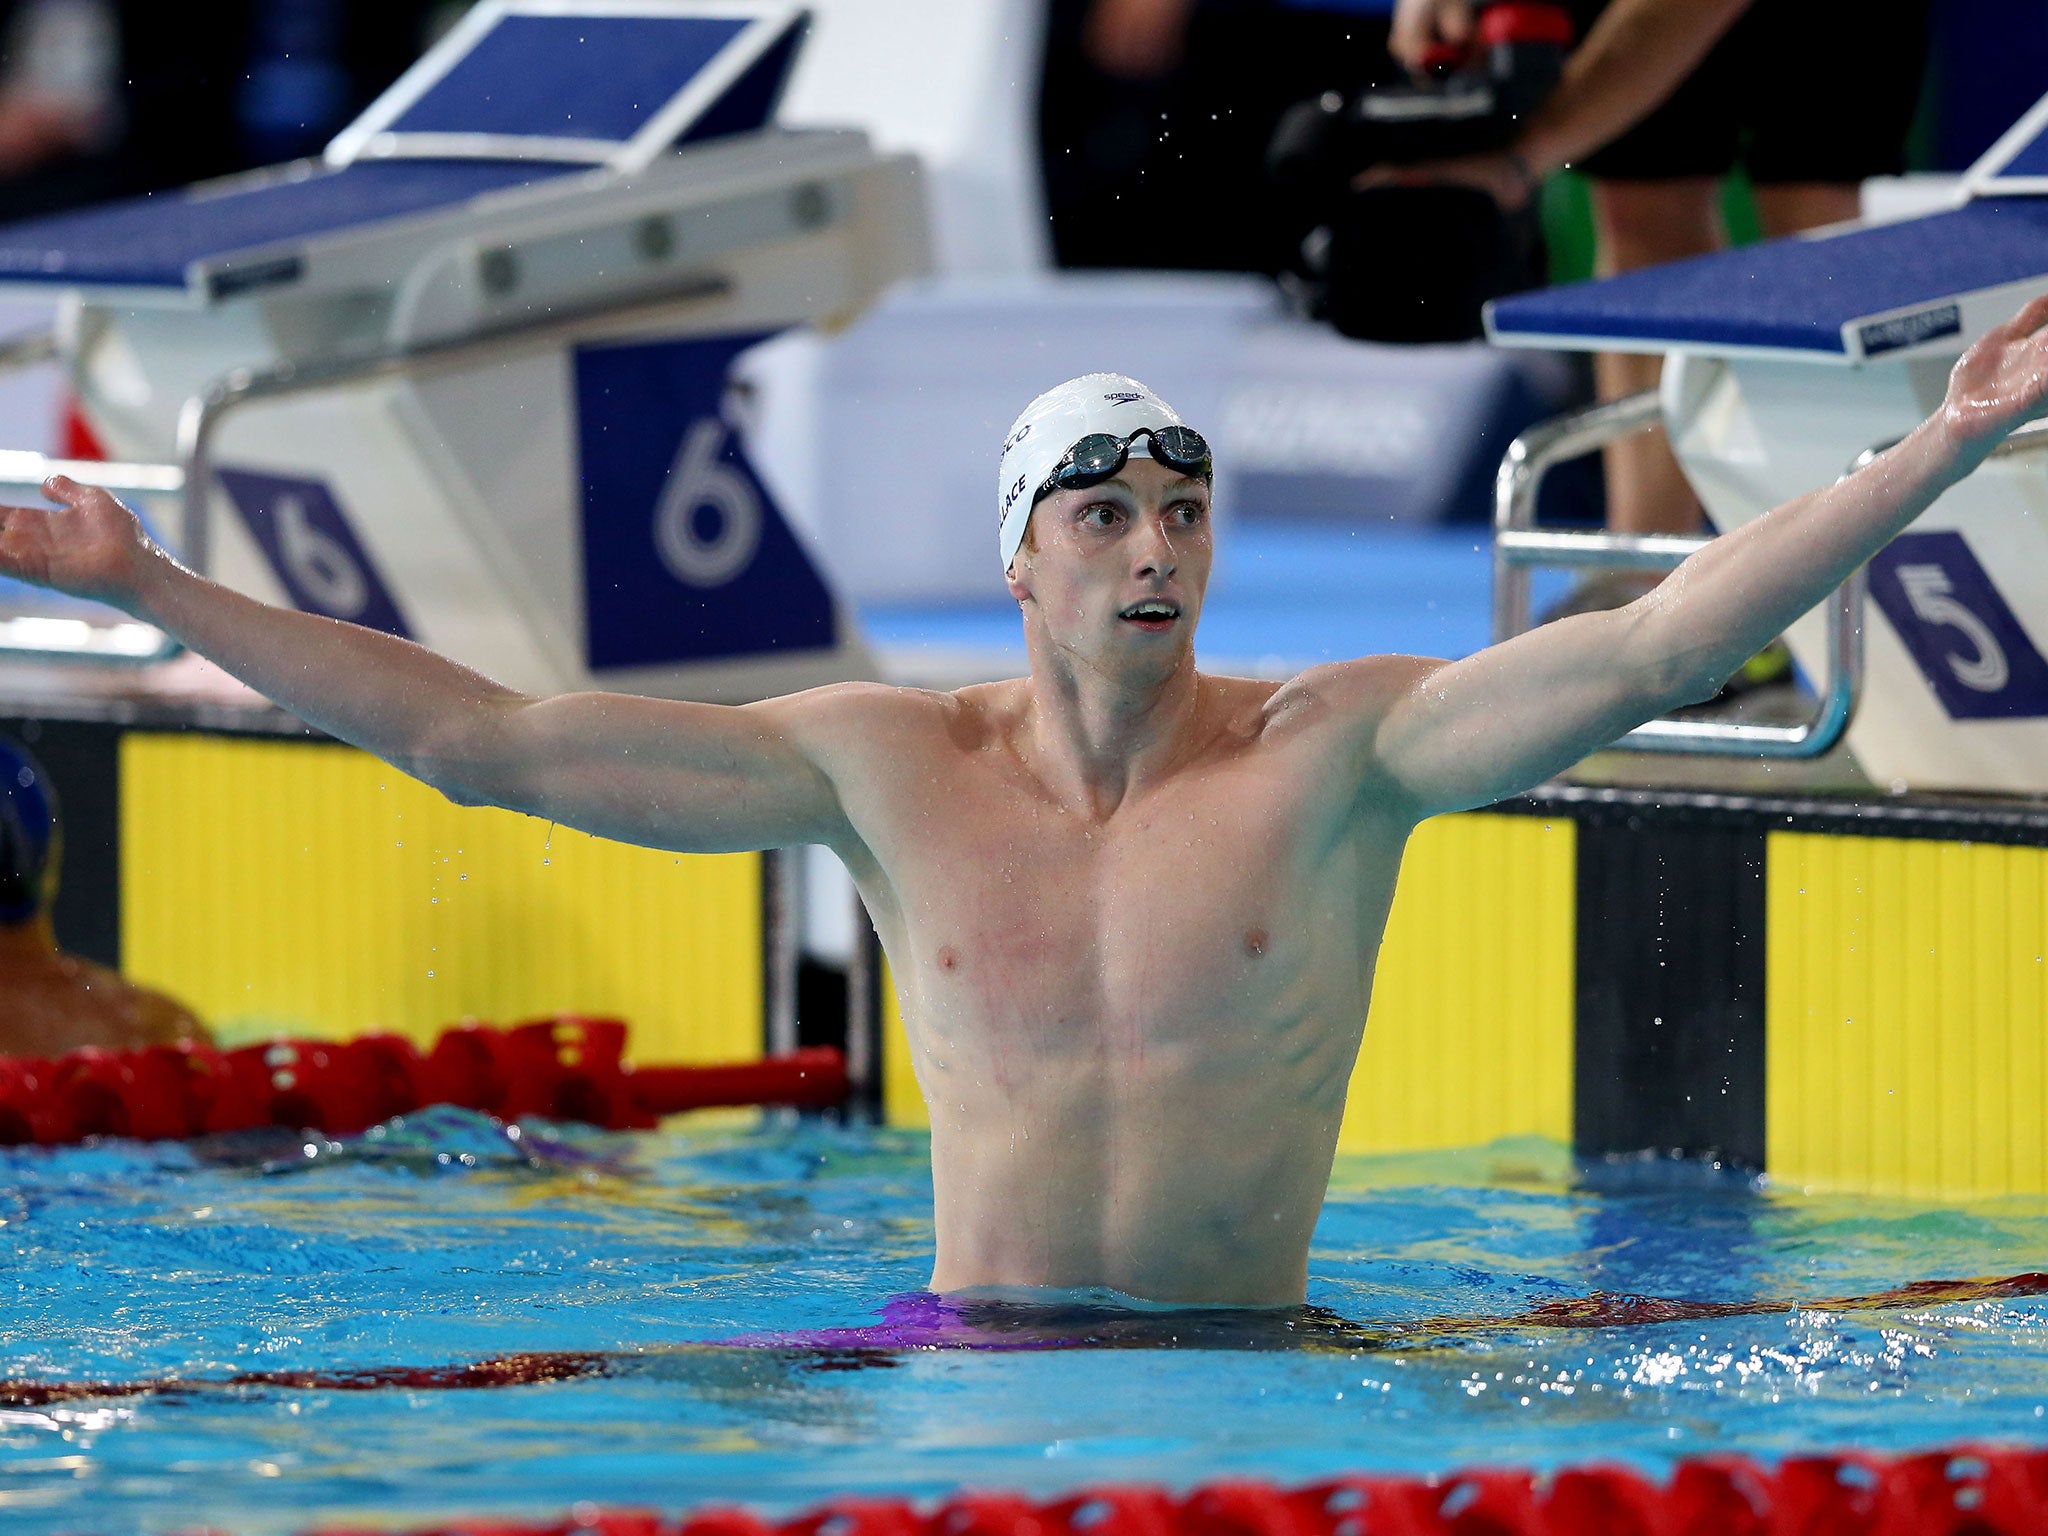 Daniel Wallace celebrates winning gold in the men's 400m individual medley